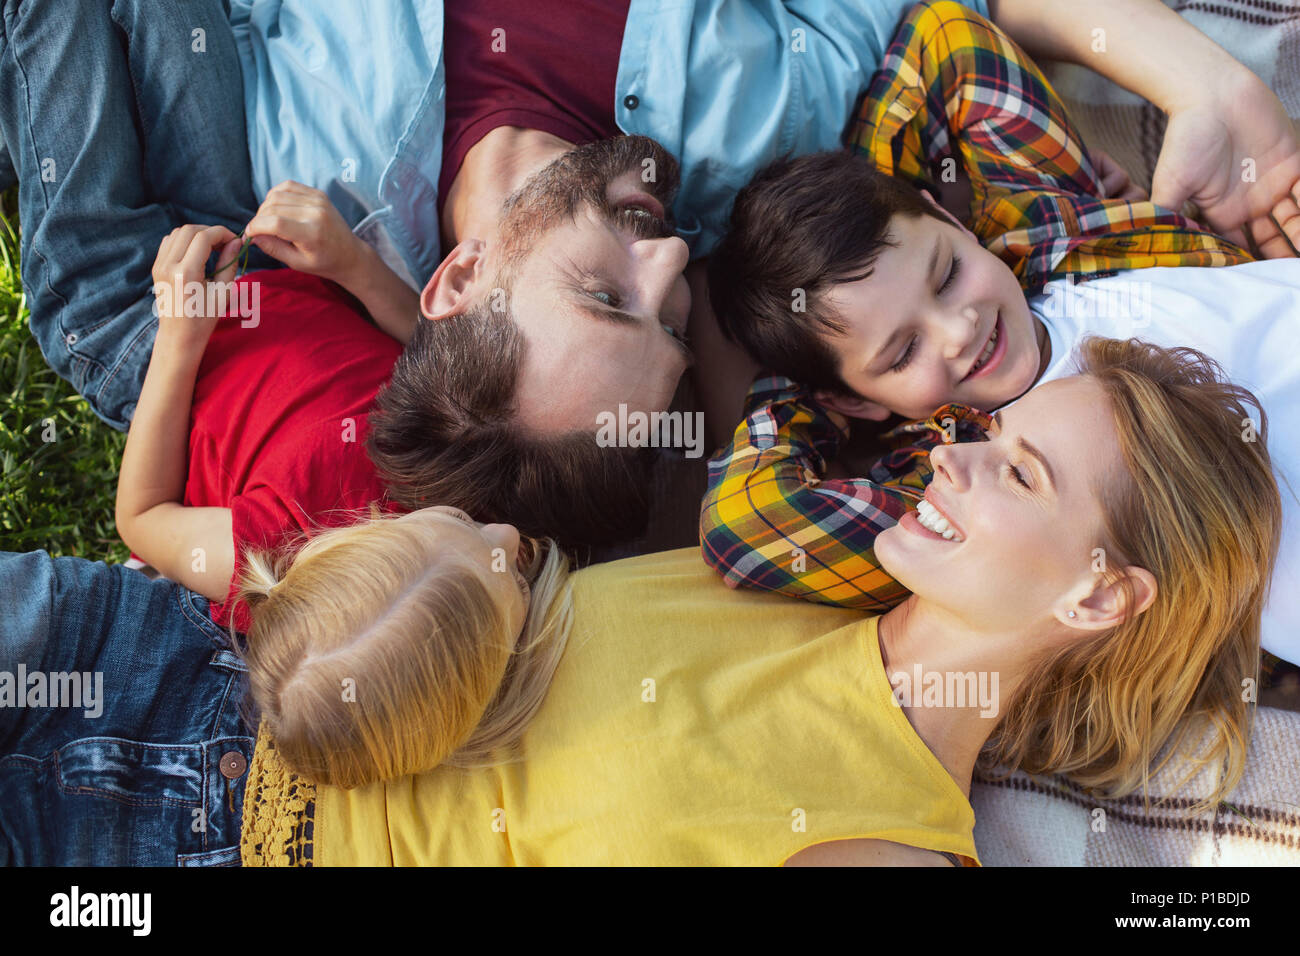 Joyful family relaxing together in the open air Stock Photo